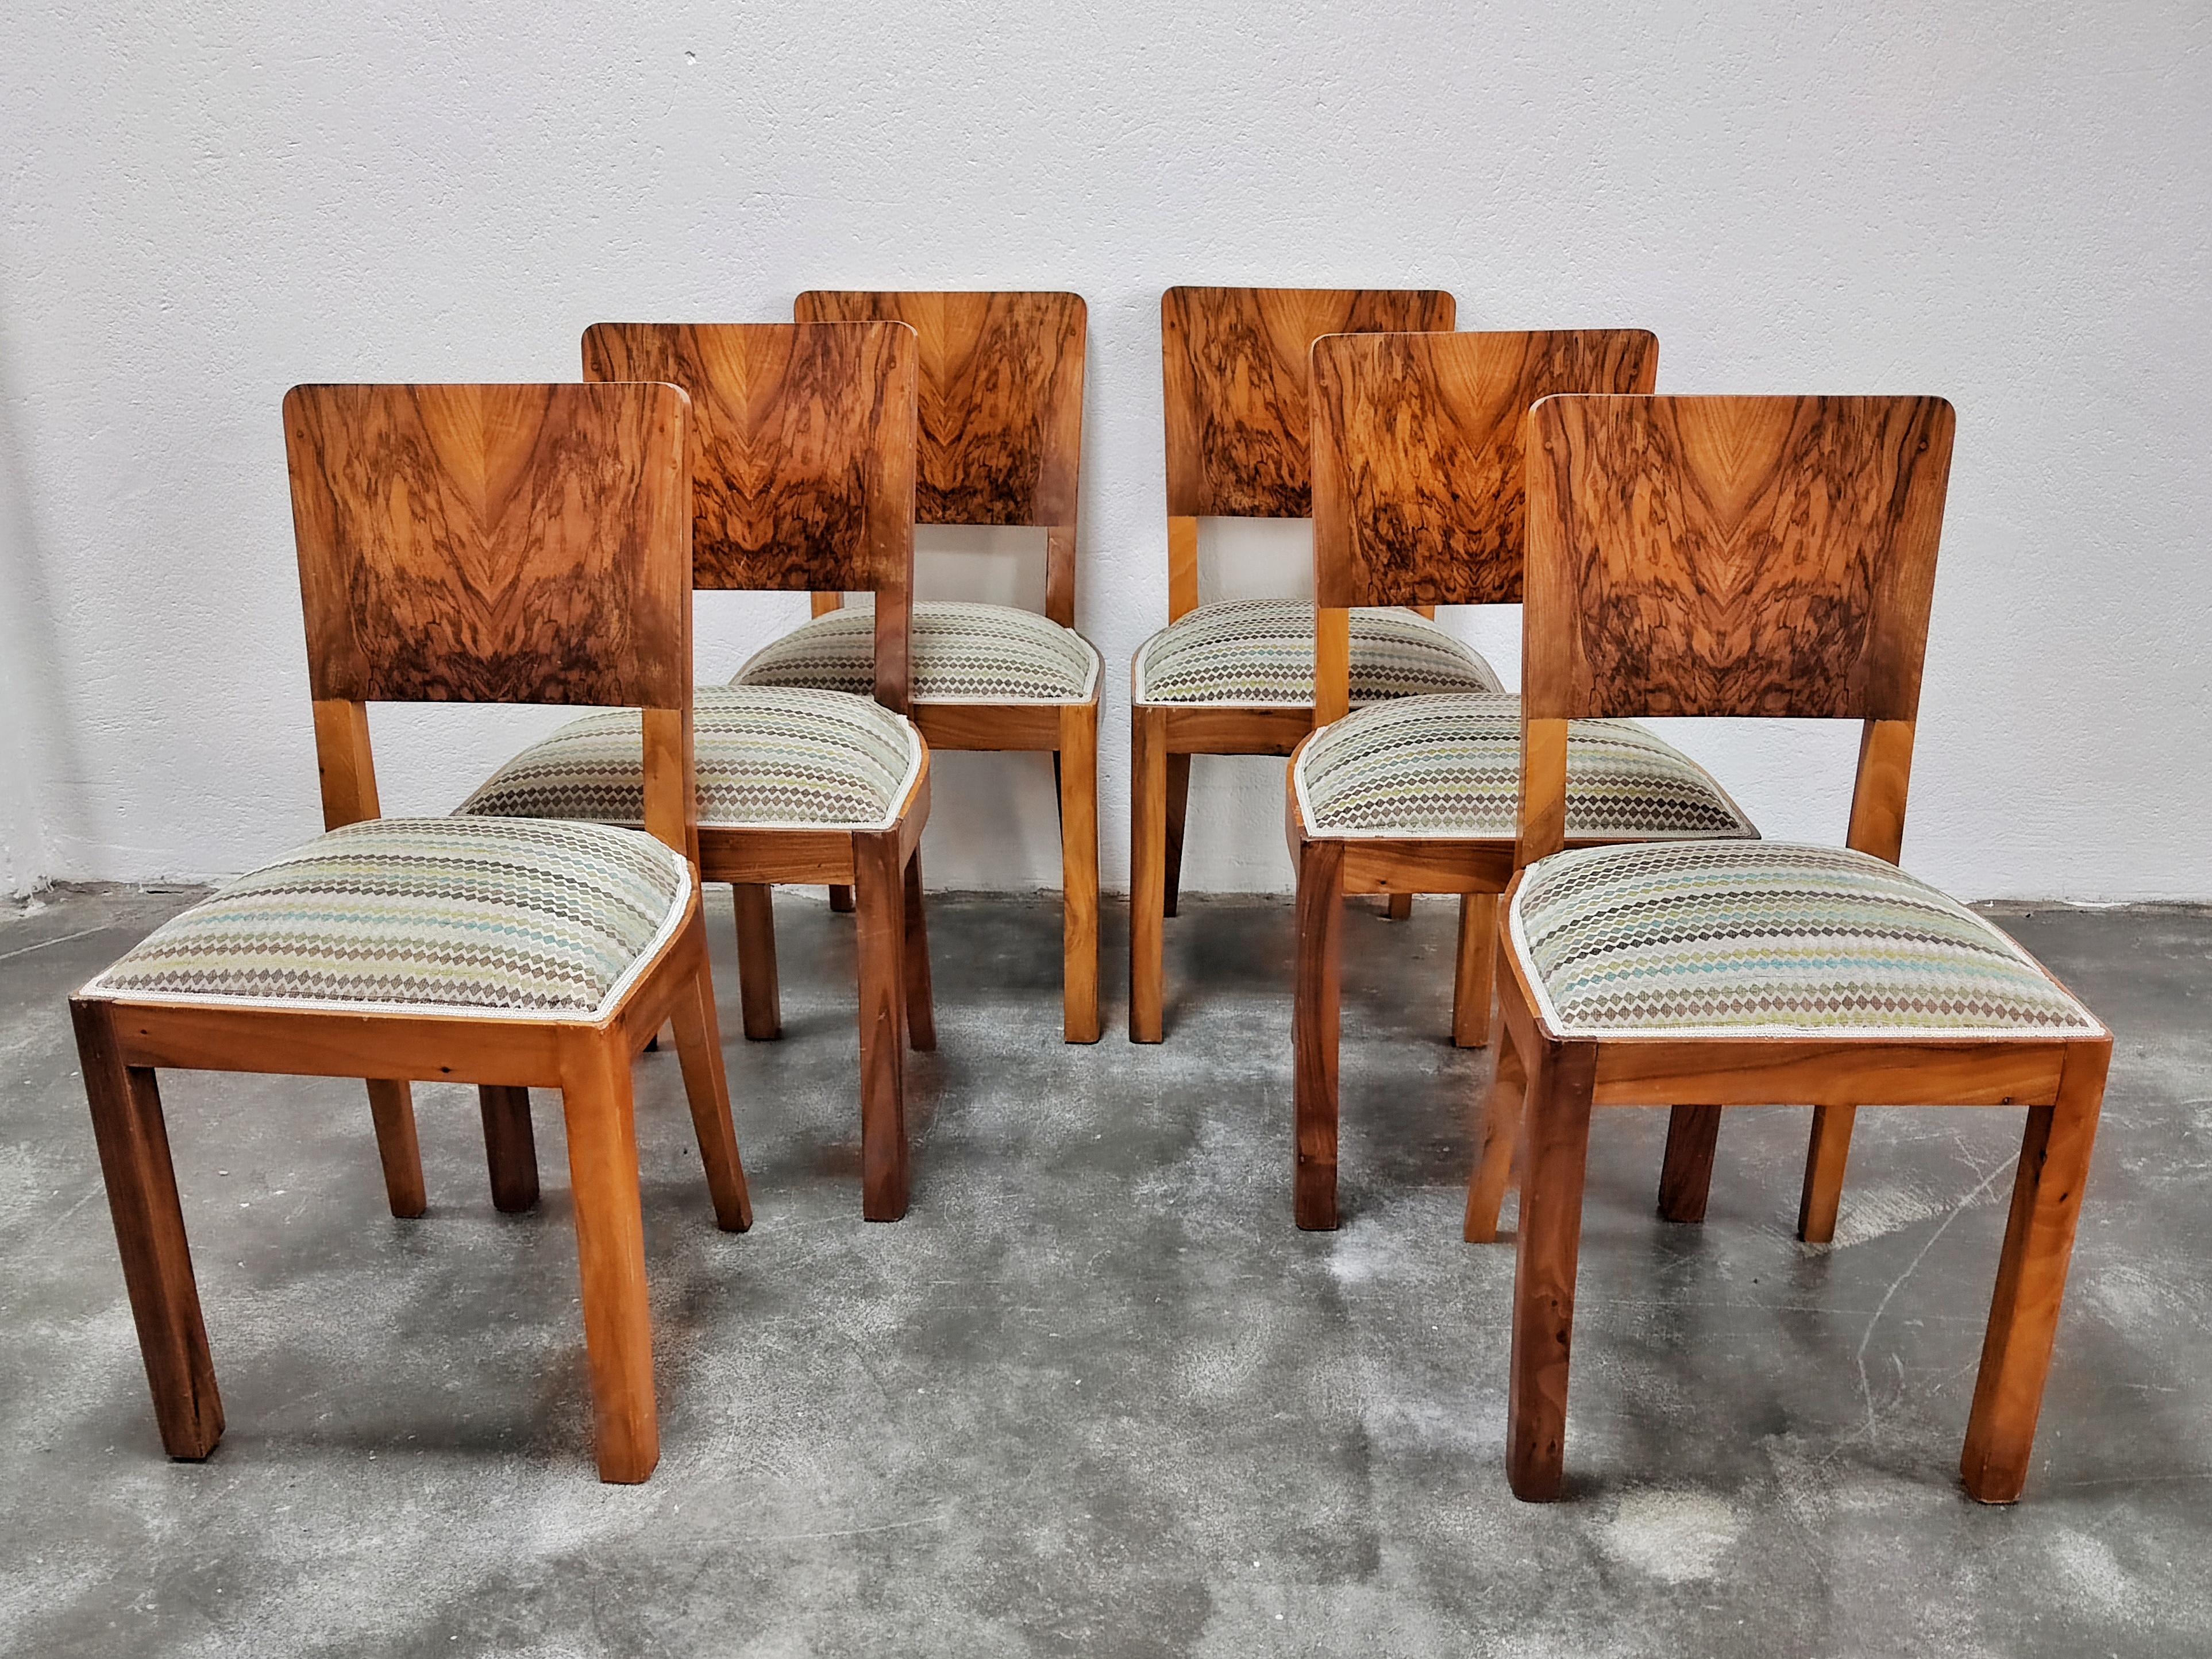 Set of Six Art Deco Dining Chairs in Walnut Roots Veneer, Austria 1940s For Sale 1